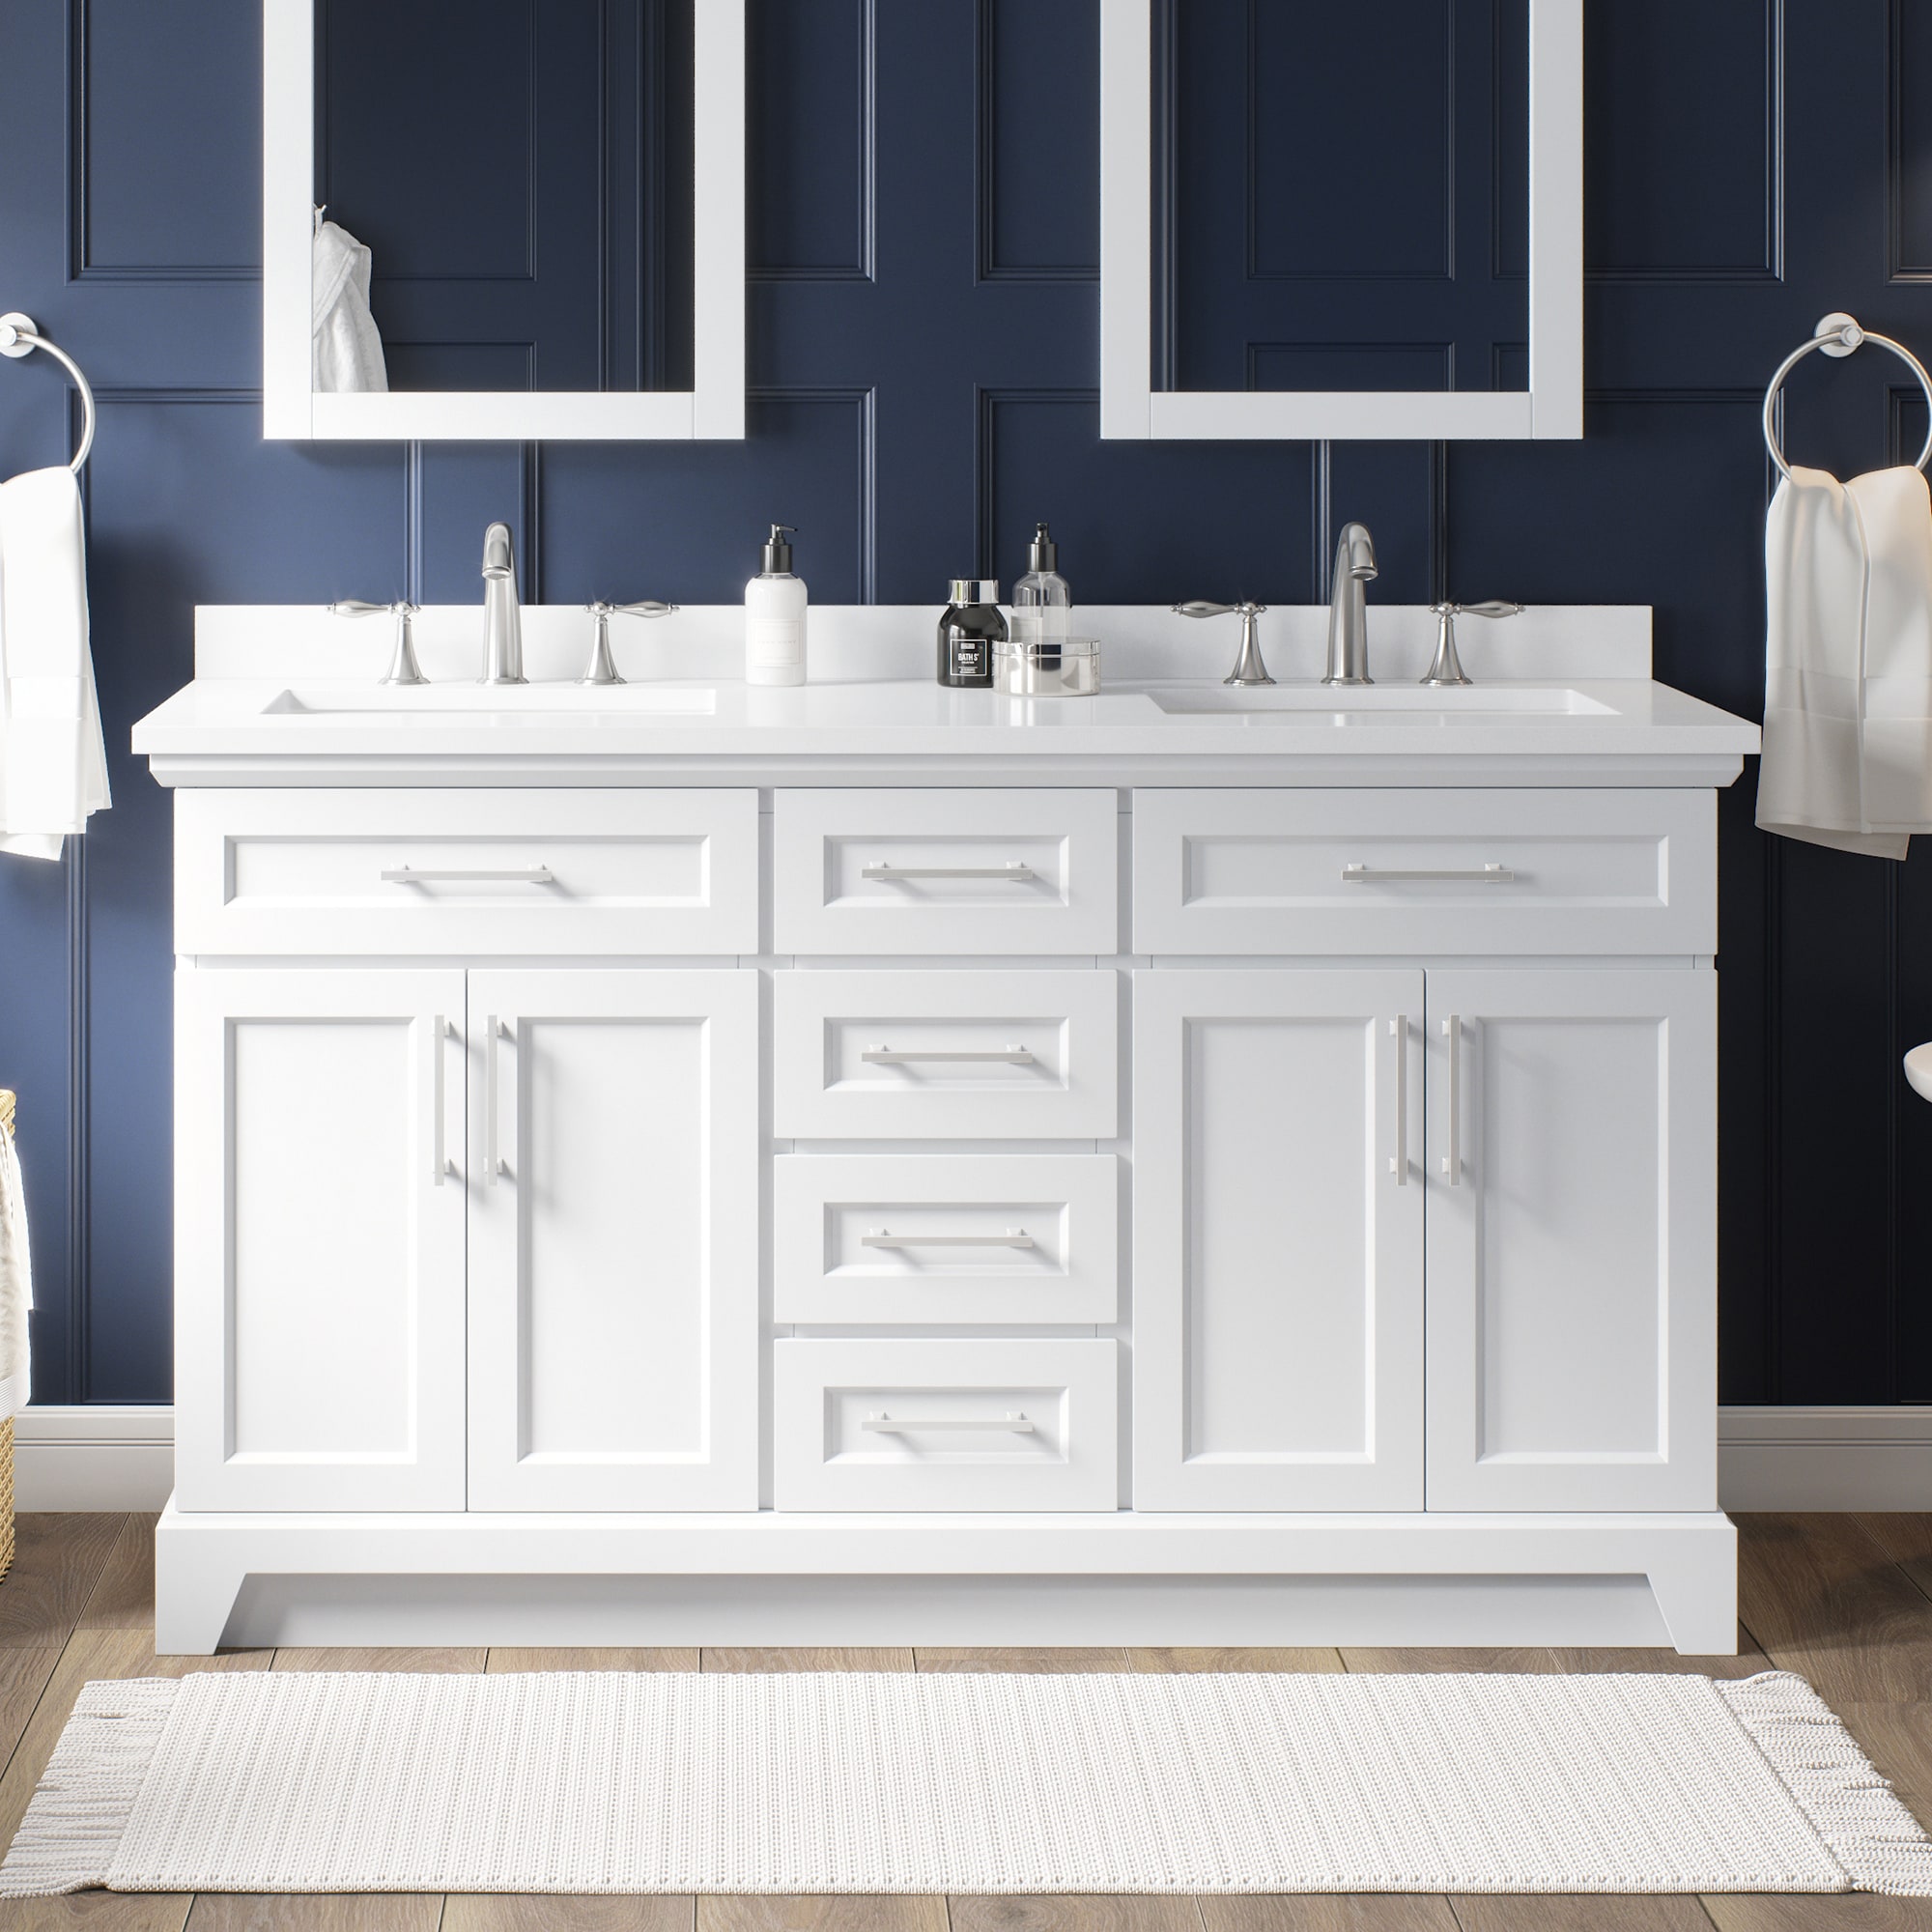 Bathroom Vanity Outlet Solutions